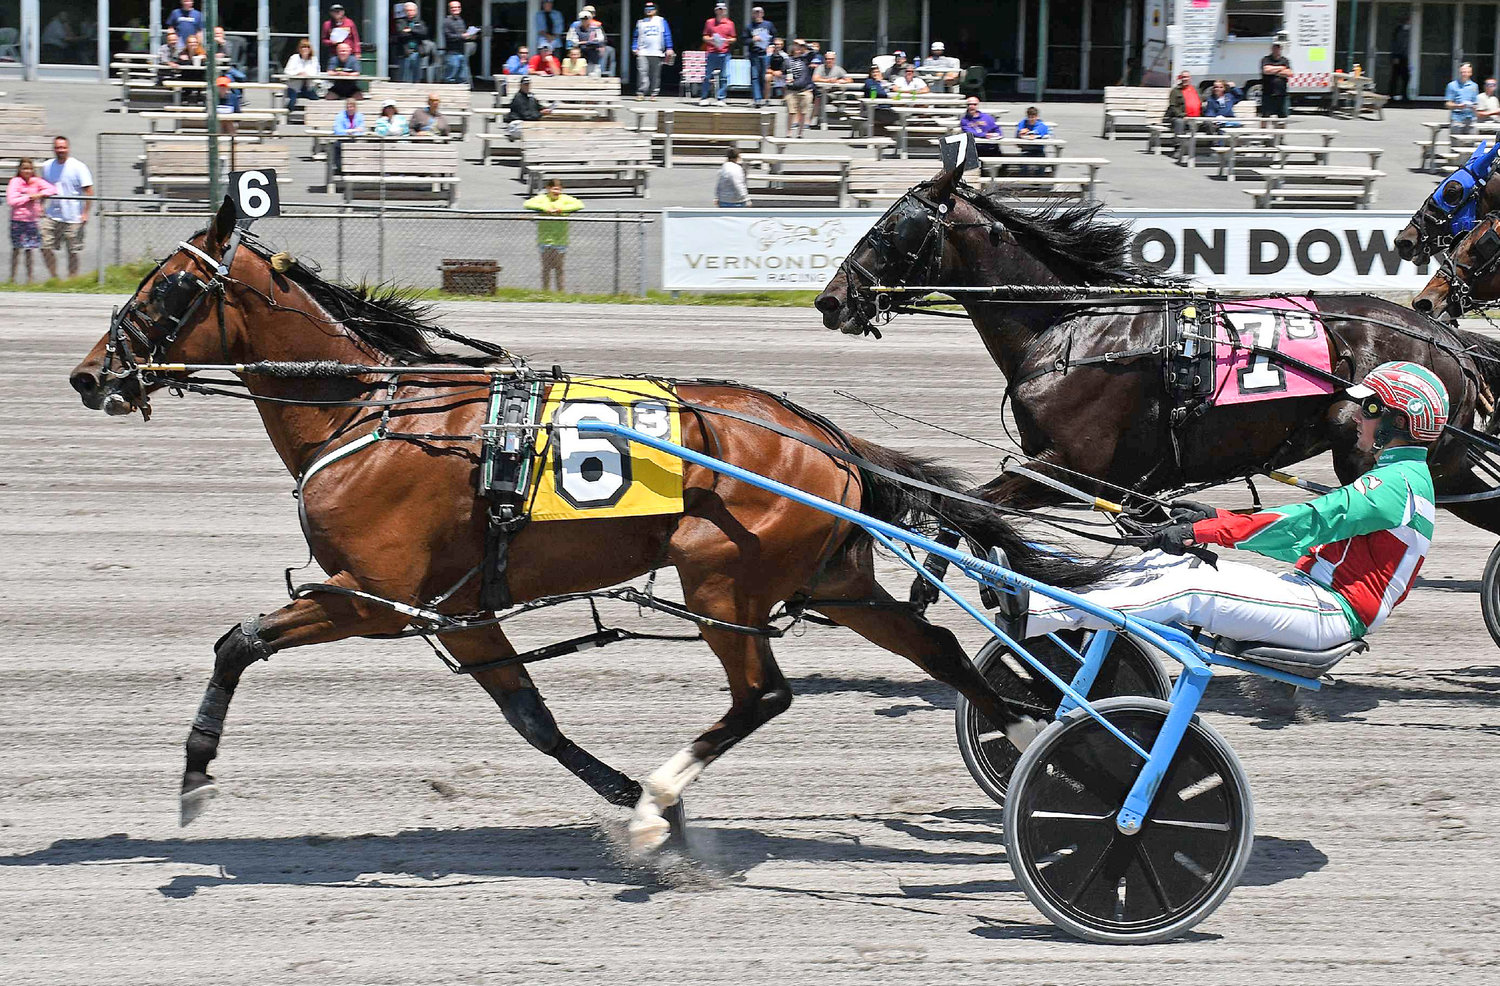 Bounty Hunter and driver Jordan Stratton won the $30,550 first division of the New York Sire Stakes on Saturday afternoon at Vernon Downs.